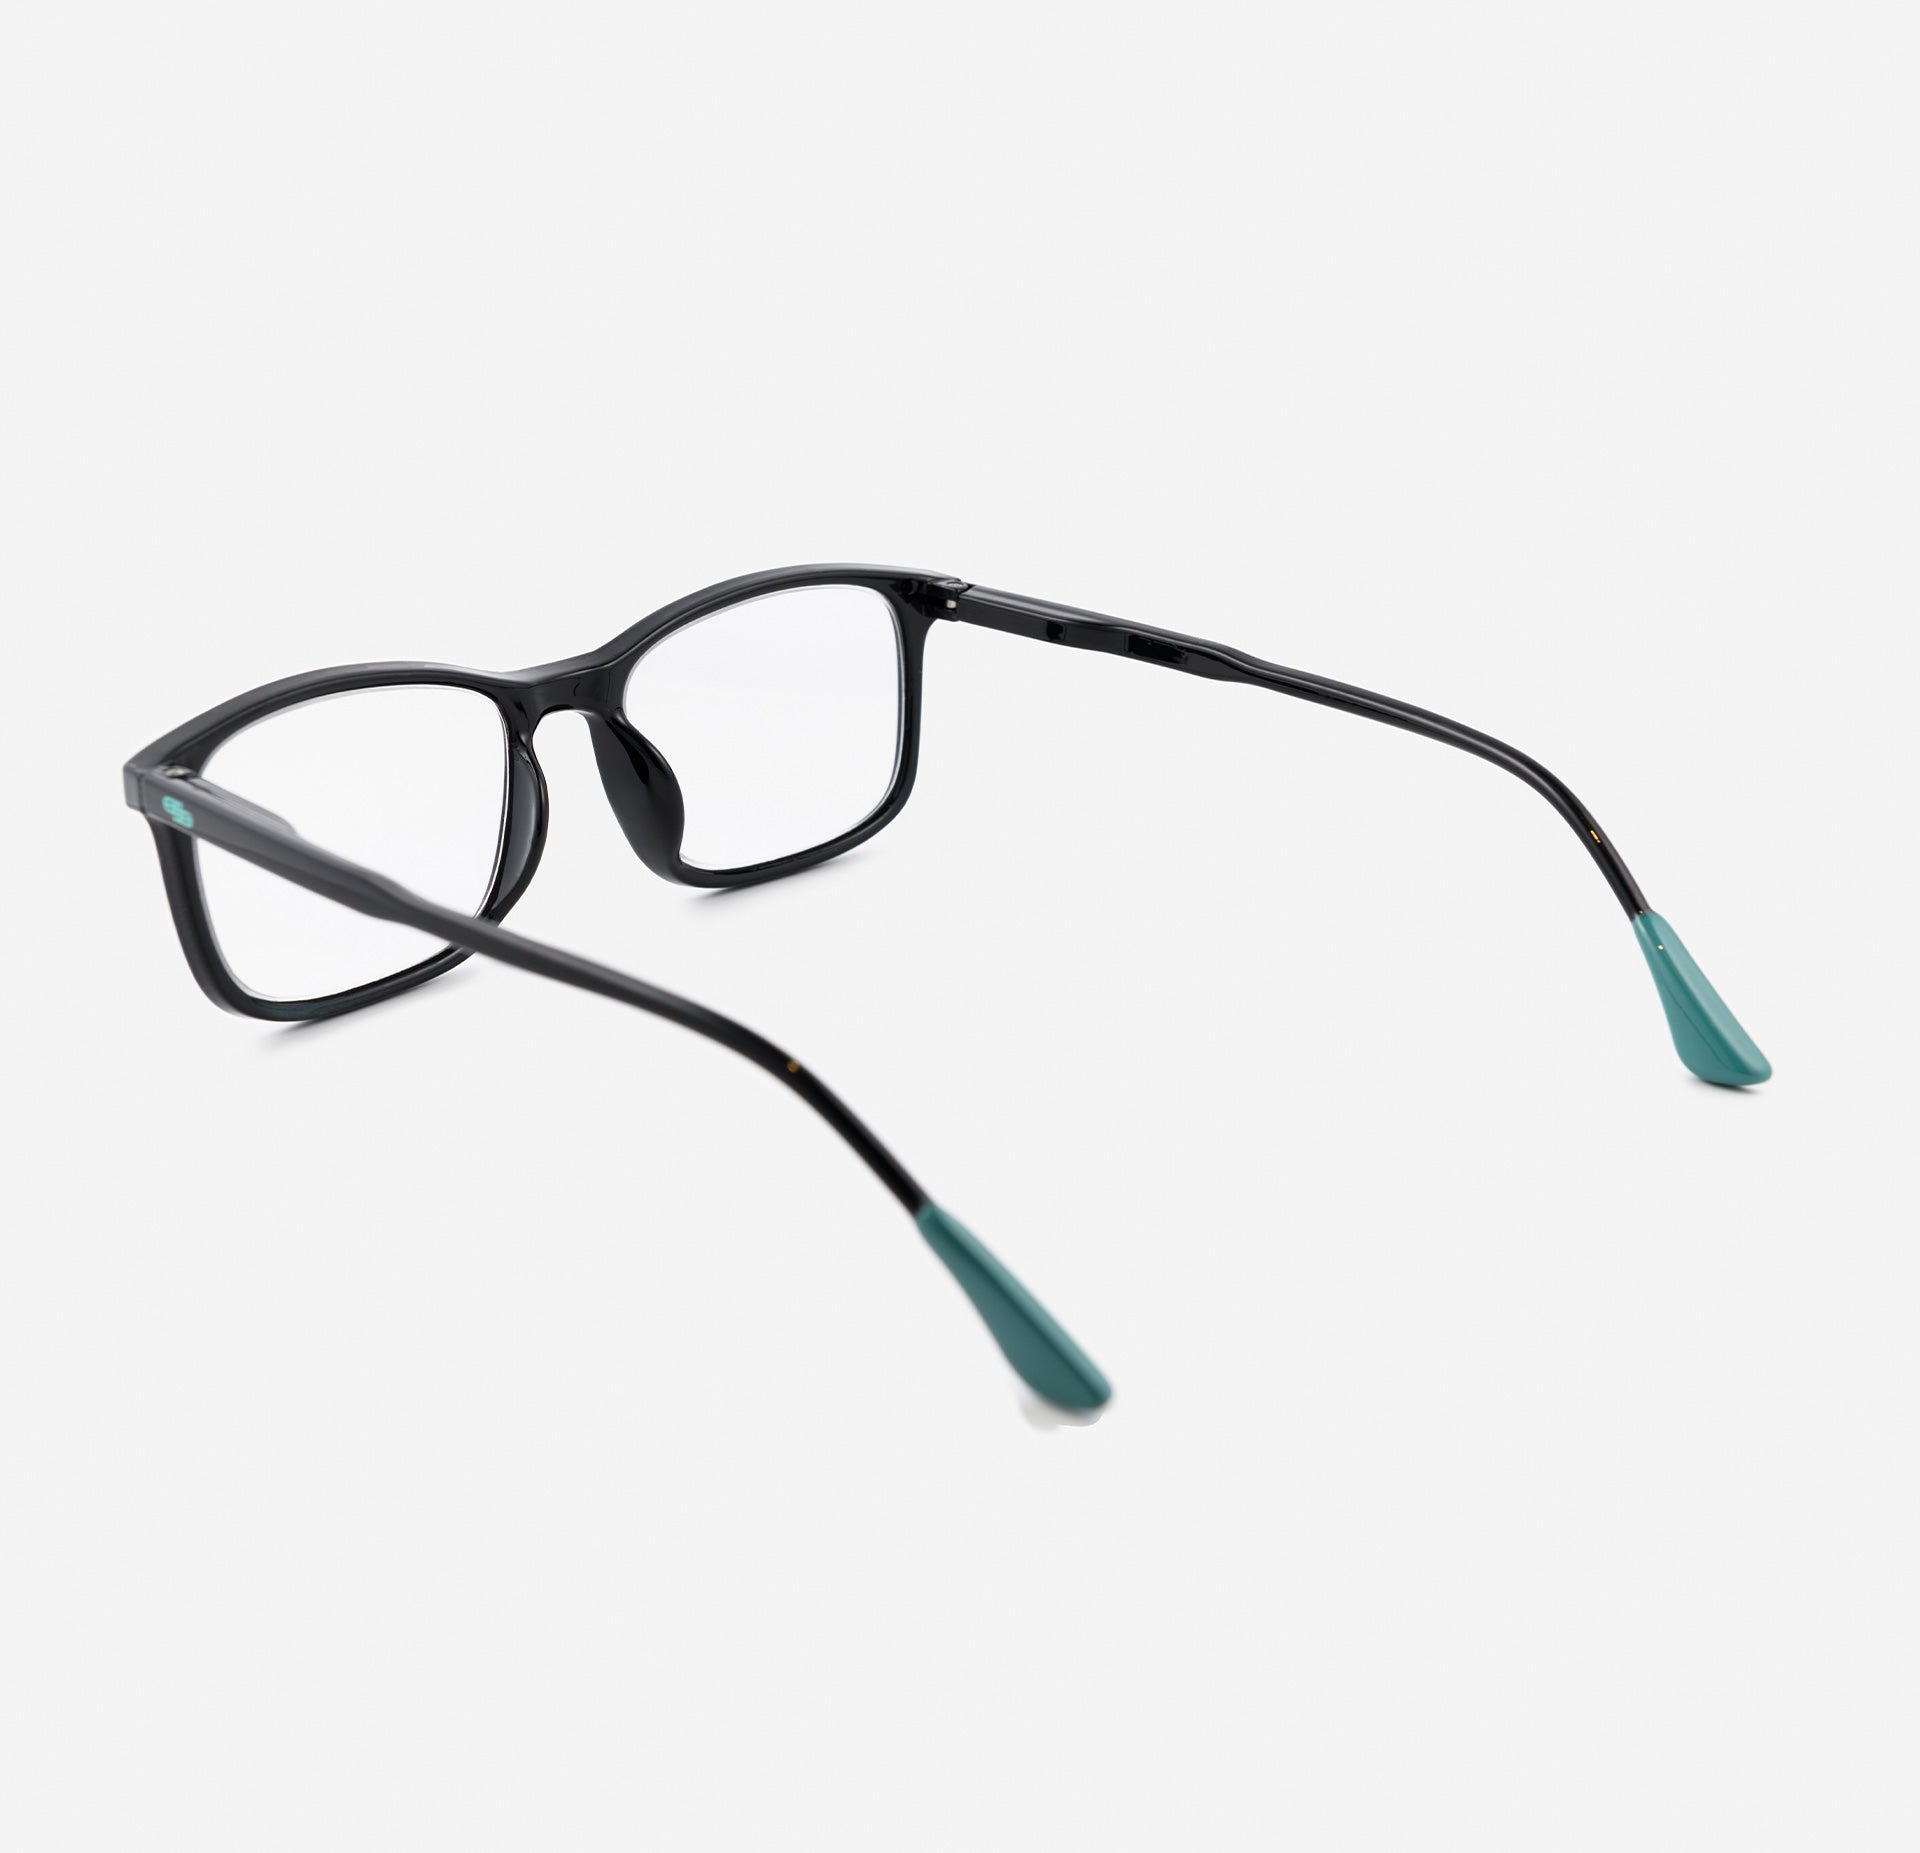 Black and green square reading glasses